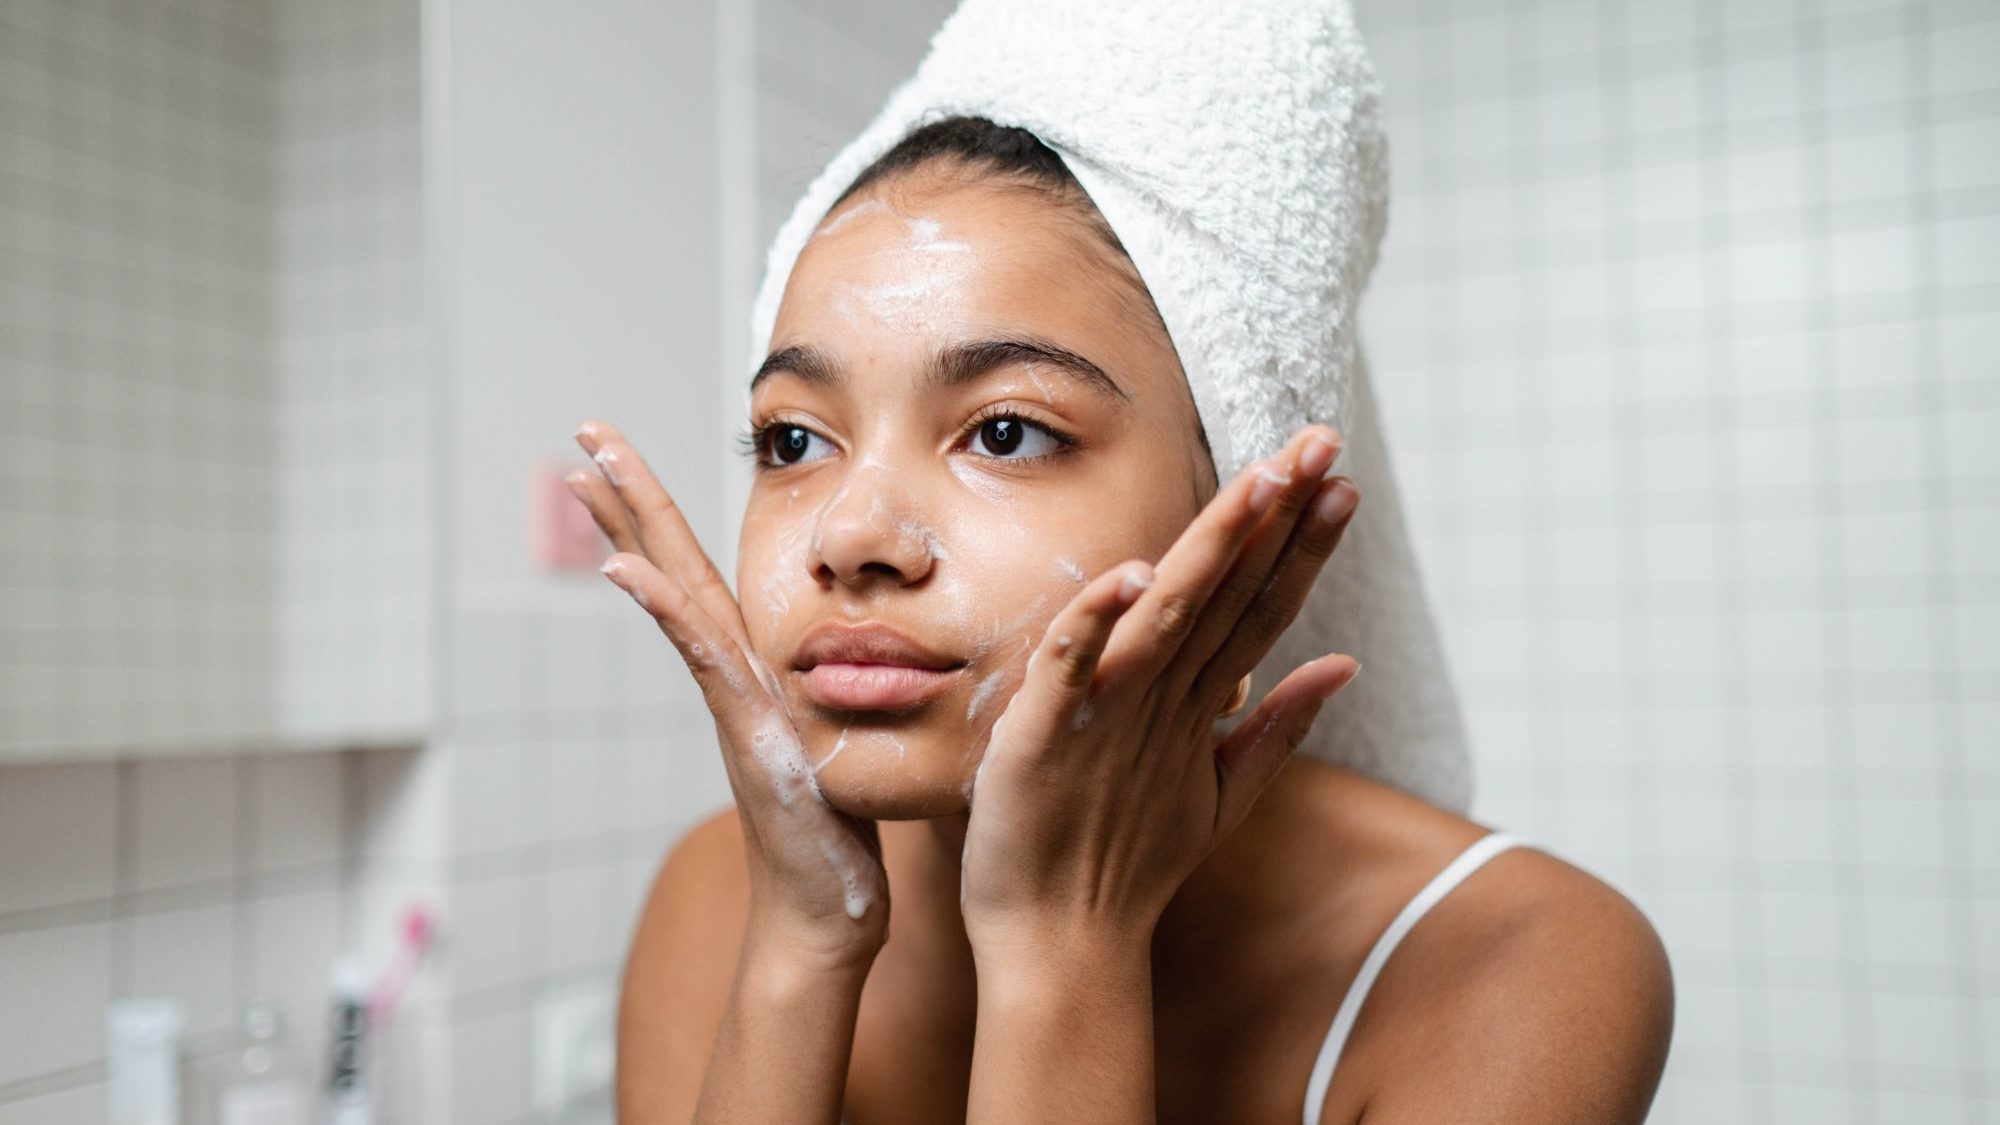 Featured image for “How does your Home Skin Care Compare?”